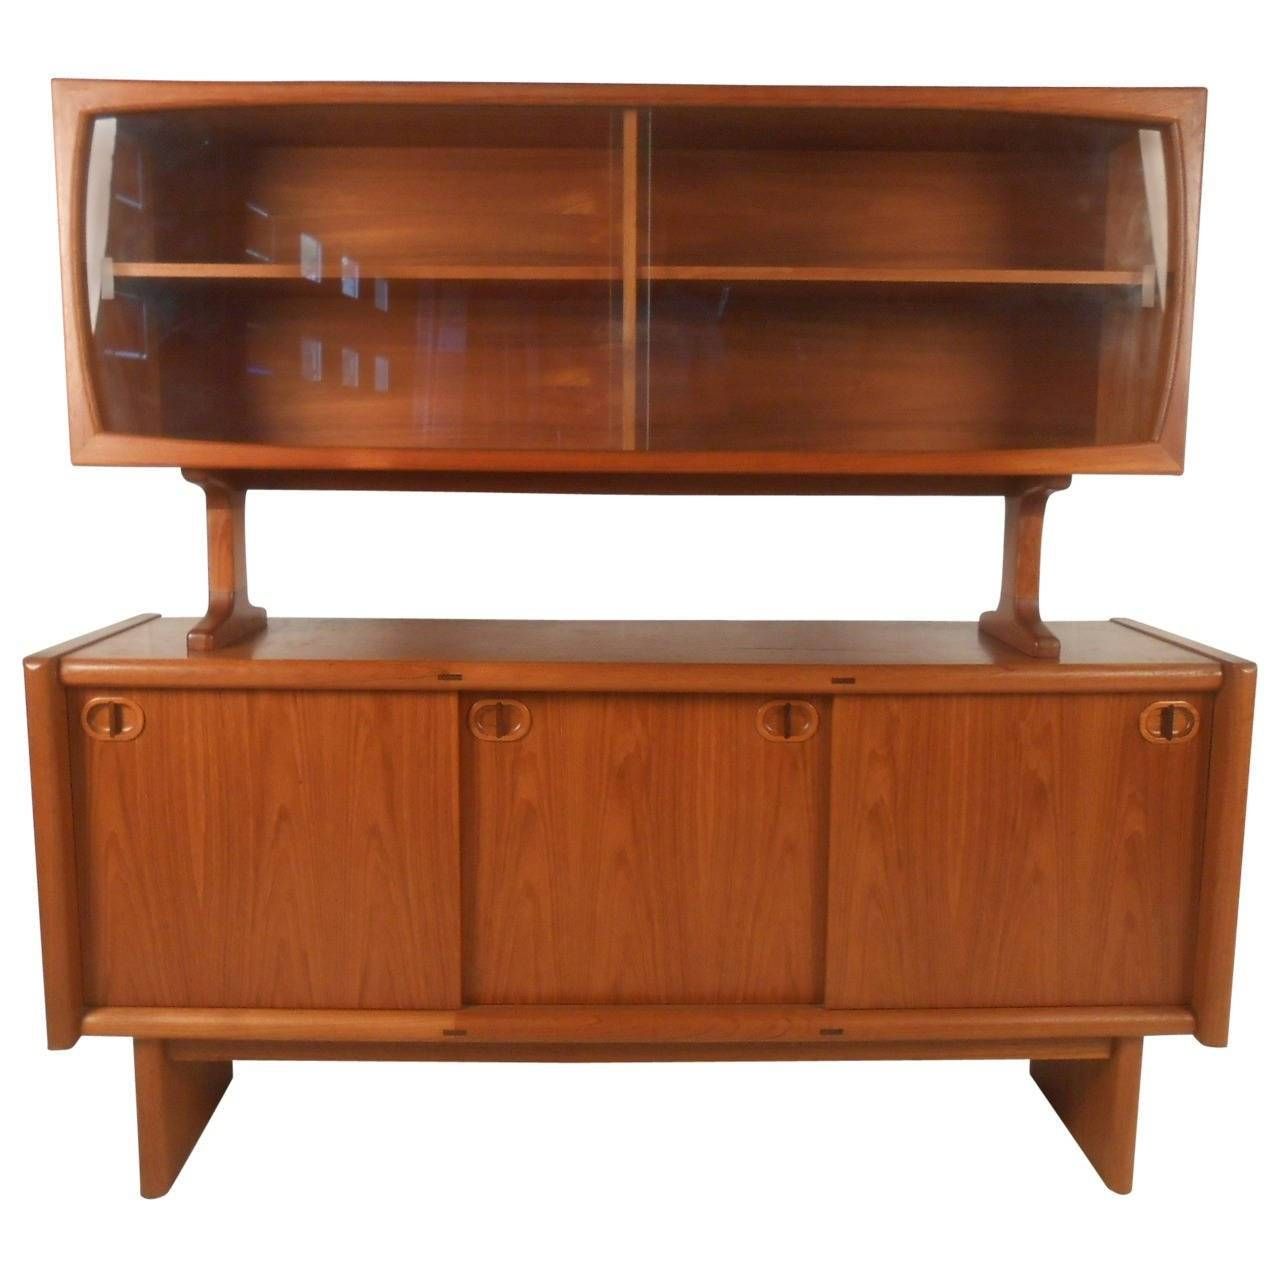 Midcentury Style Danish Teak Sideboard With Display Topper For Within Most Popular Teak Sideboards (View 11 of 15)